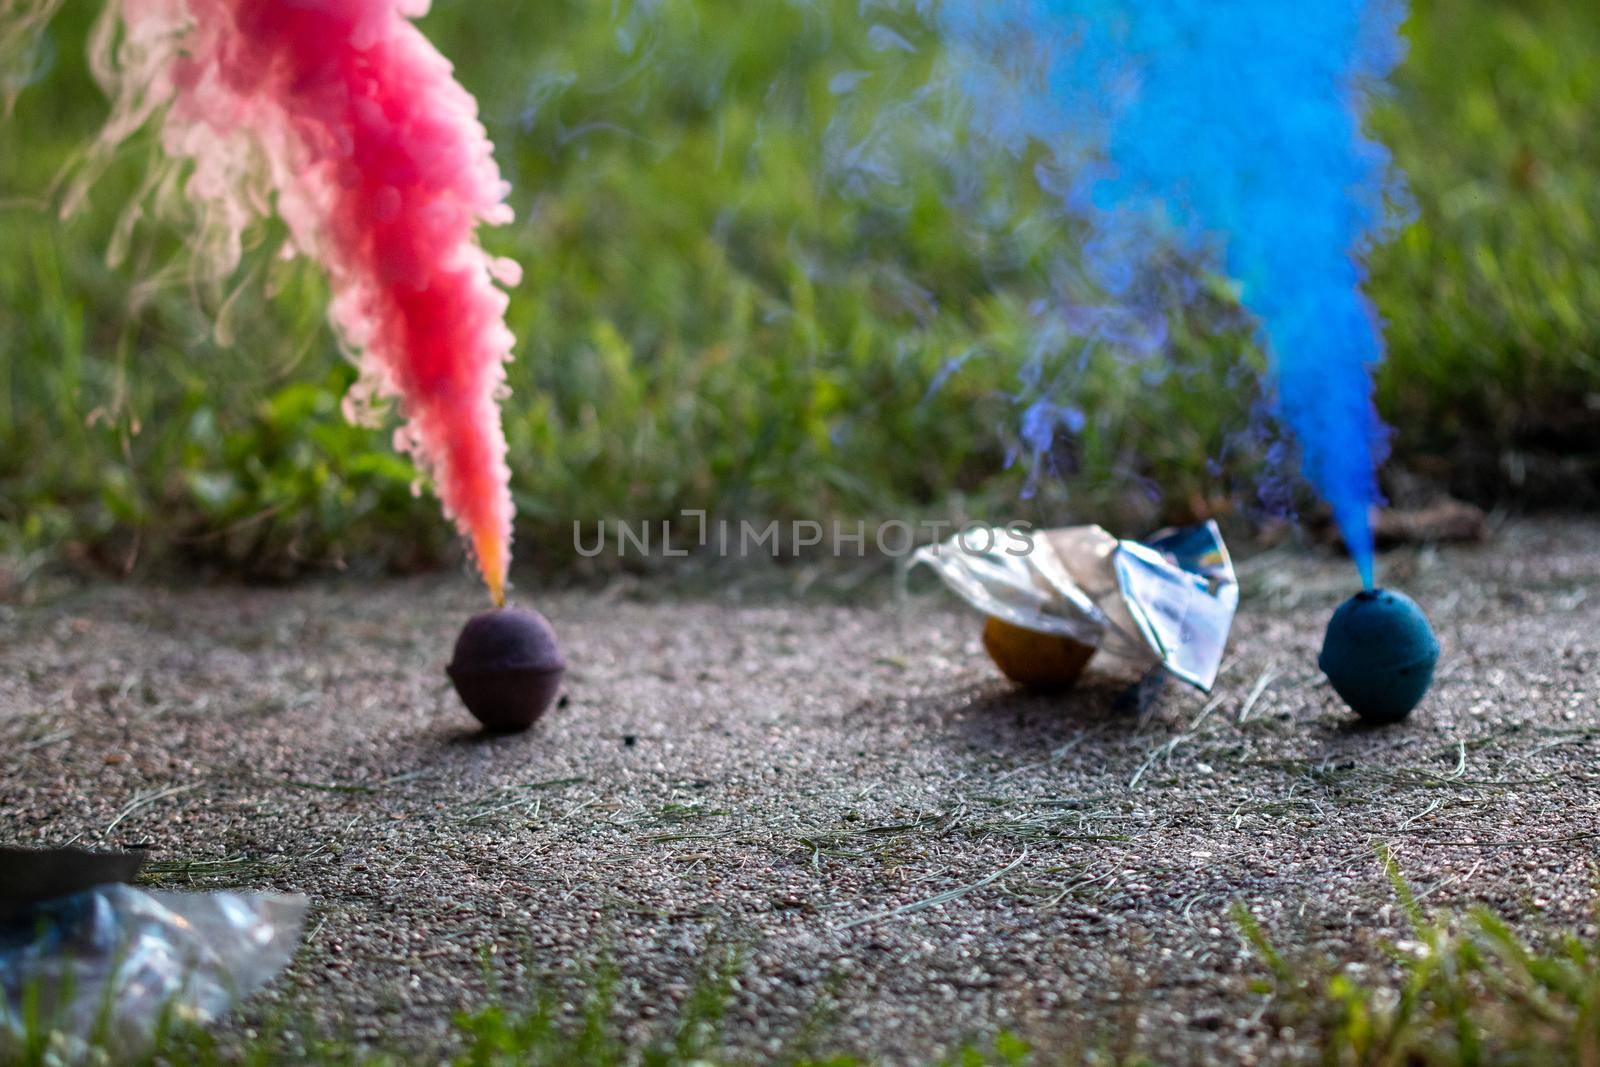 Vibrant colorful display of Red and Blue smoke bombs celebrating independence day with textured background 4th of July . Shows artistic use of color and design. by gena_wells